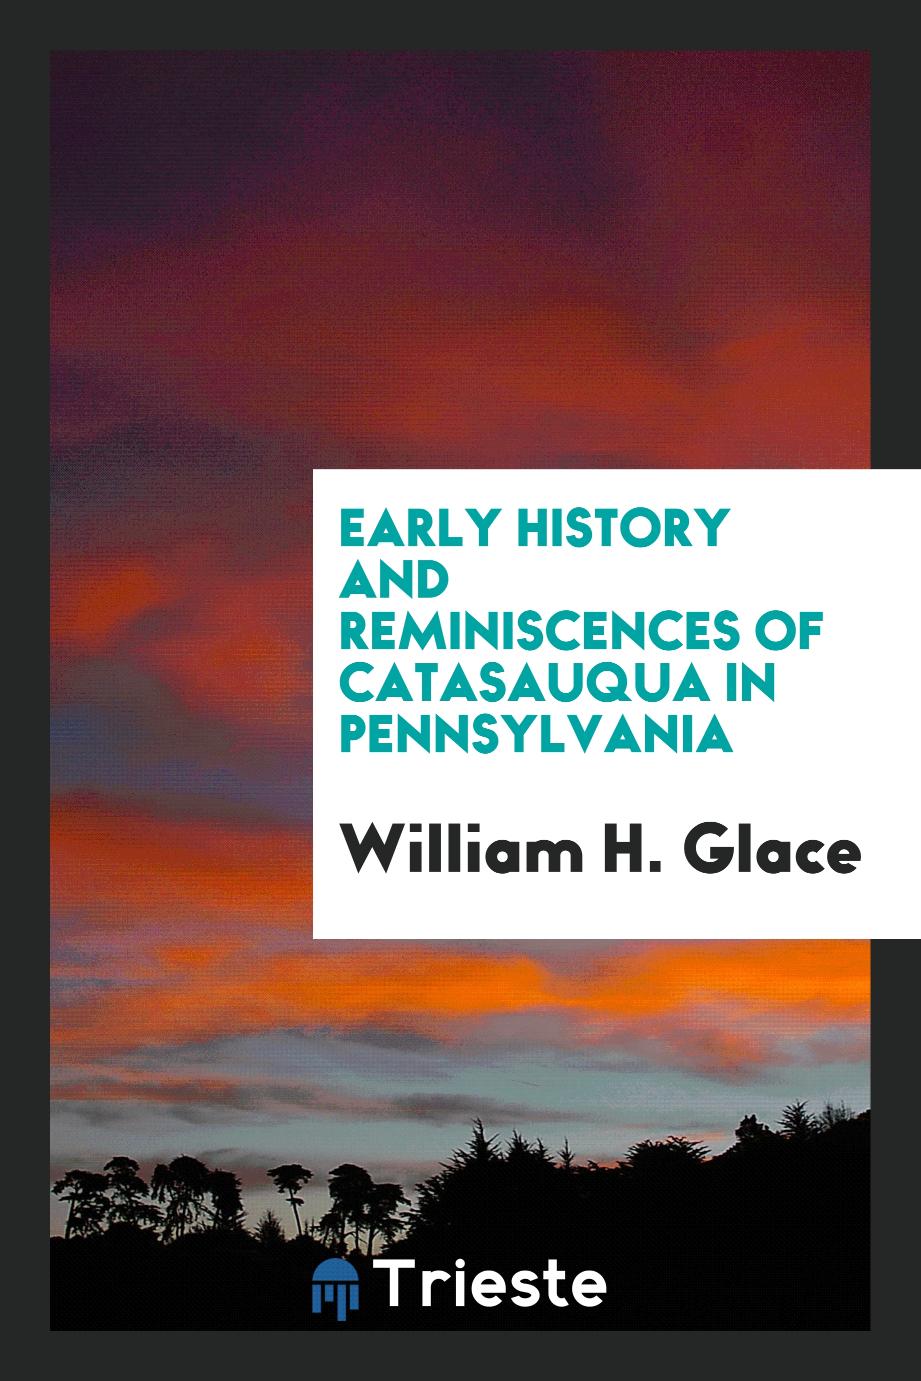 Early History and Reminiscences of Catasauqua in Pennsylvania